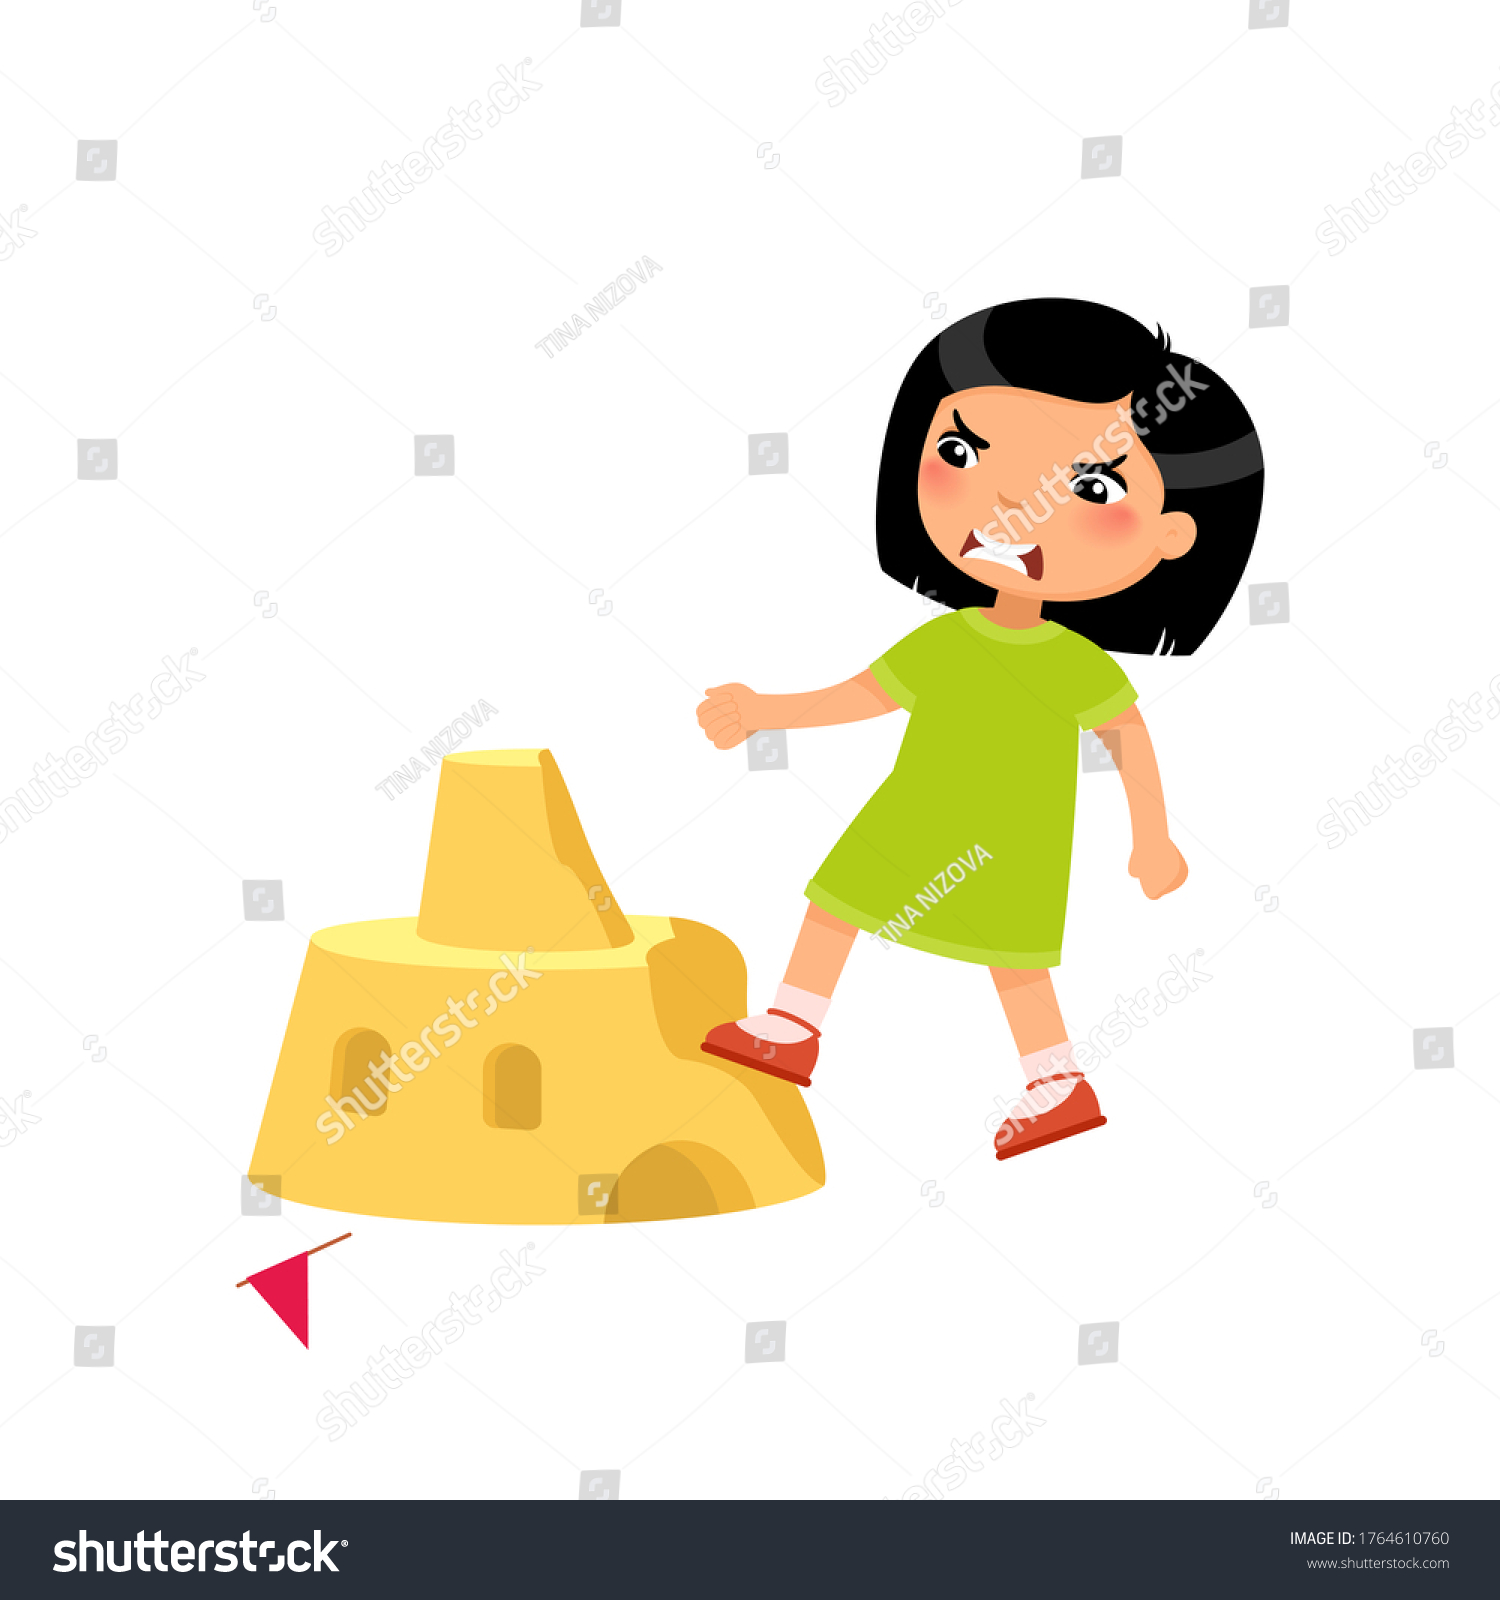 SVG of Angry asian girl destroying sandcastle flat vector illustration. Little kid breaking beach fortress cartoon character. Cruel child ruining sand tower isolated on white background. Violence concept
 svg